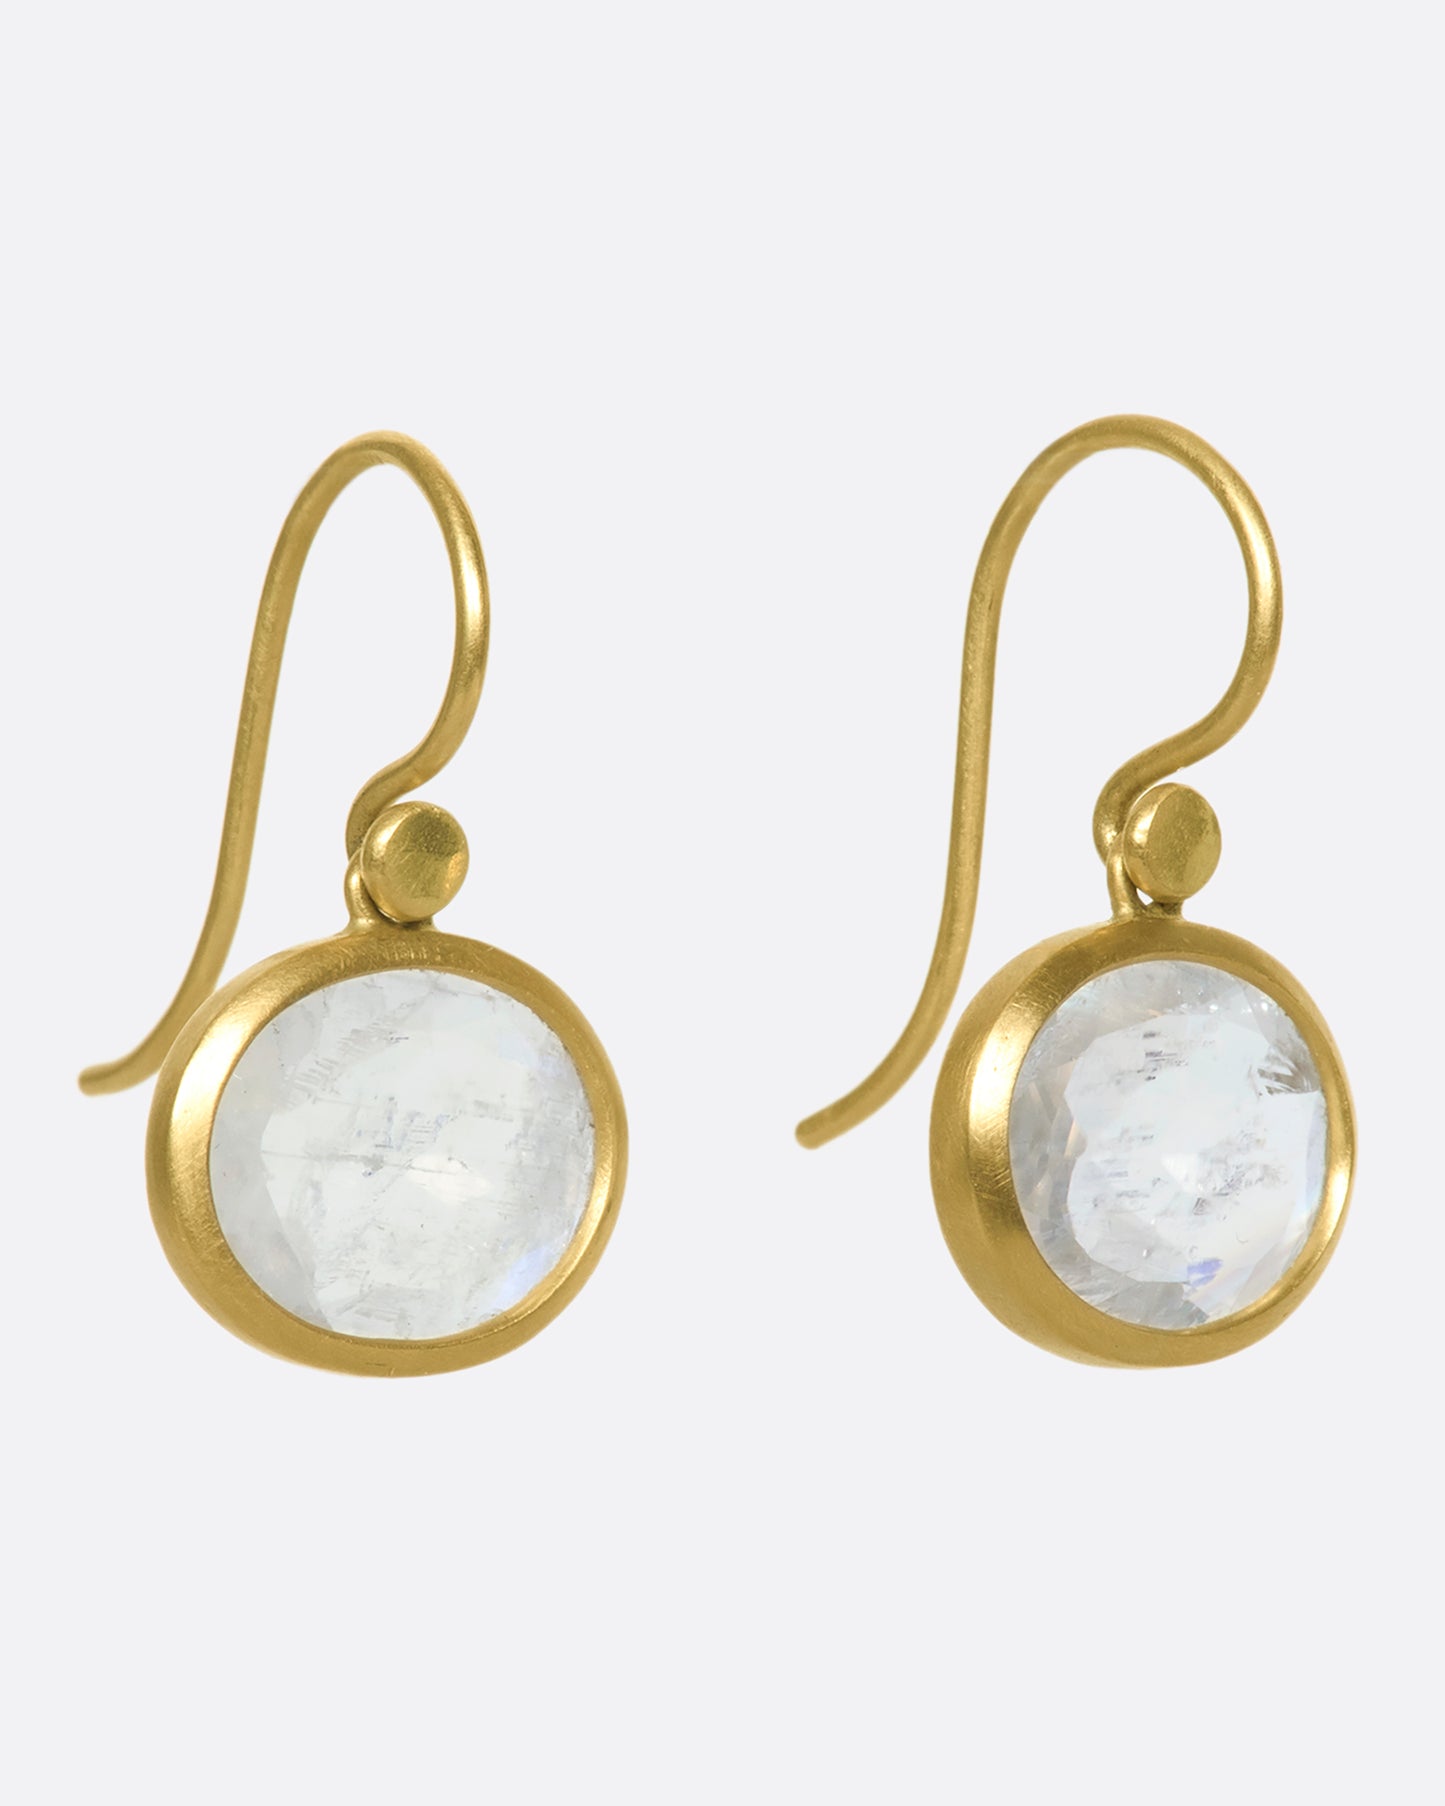 A side view of a pair of oval moonstone earrings set in yellow gold bezels.